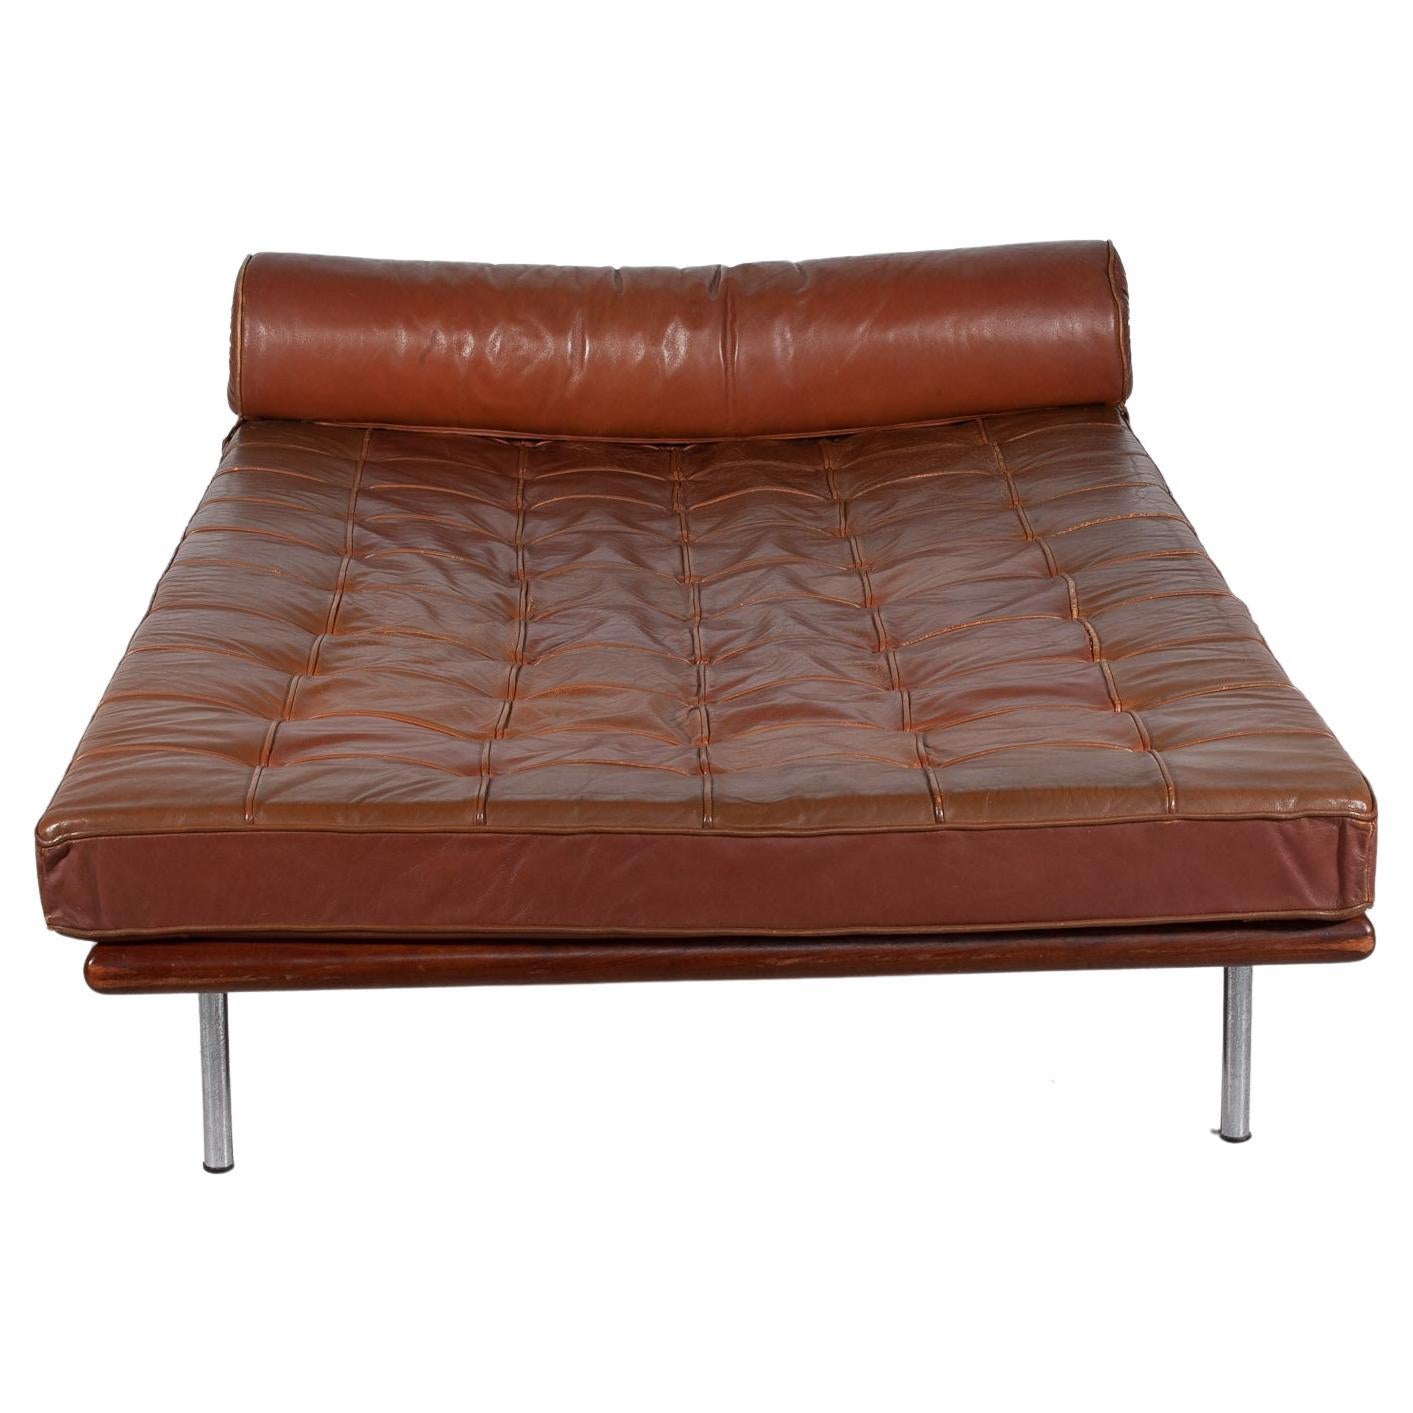 Brown Leather Barcelona Daybed by Ludwig Mies van der Rohe, for Knoll For Sale